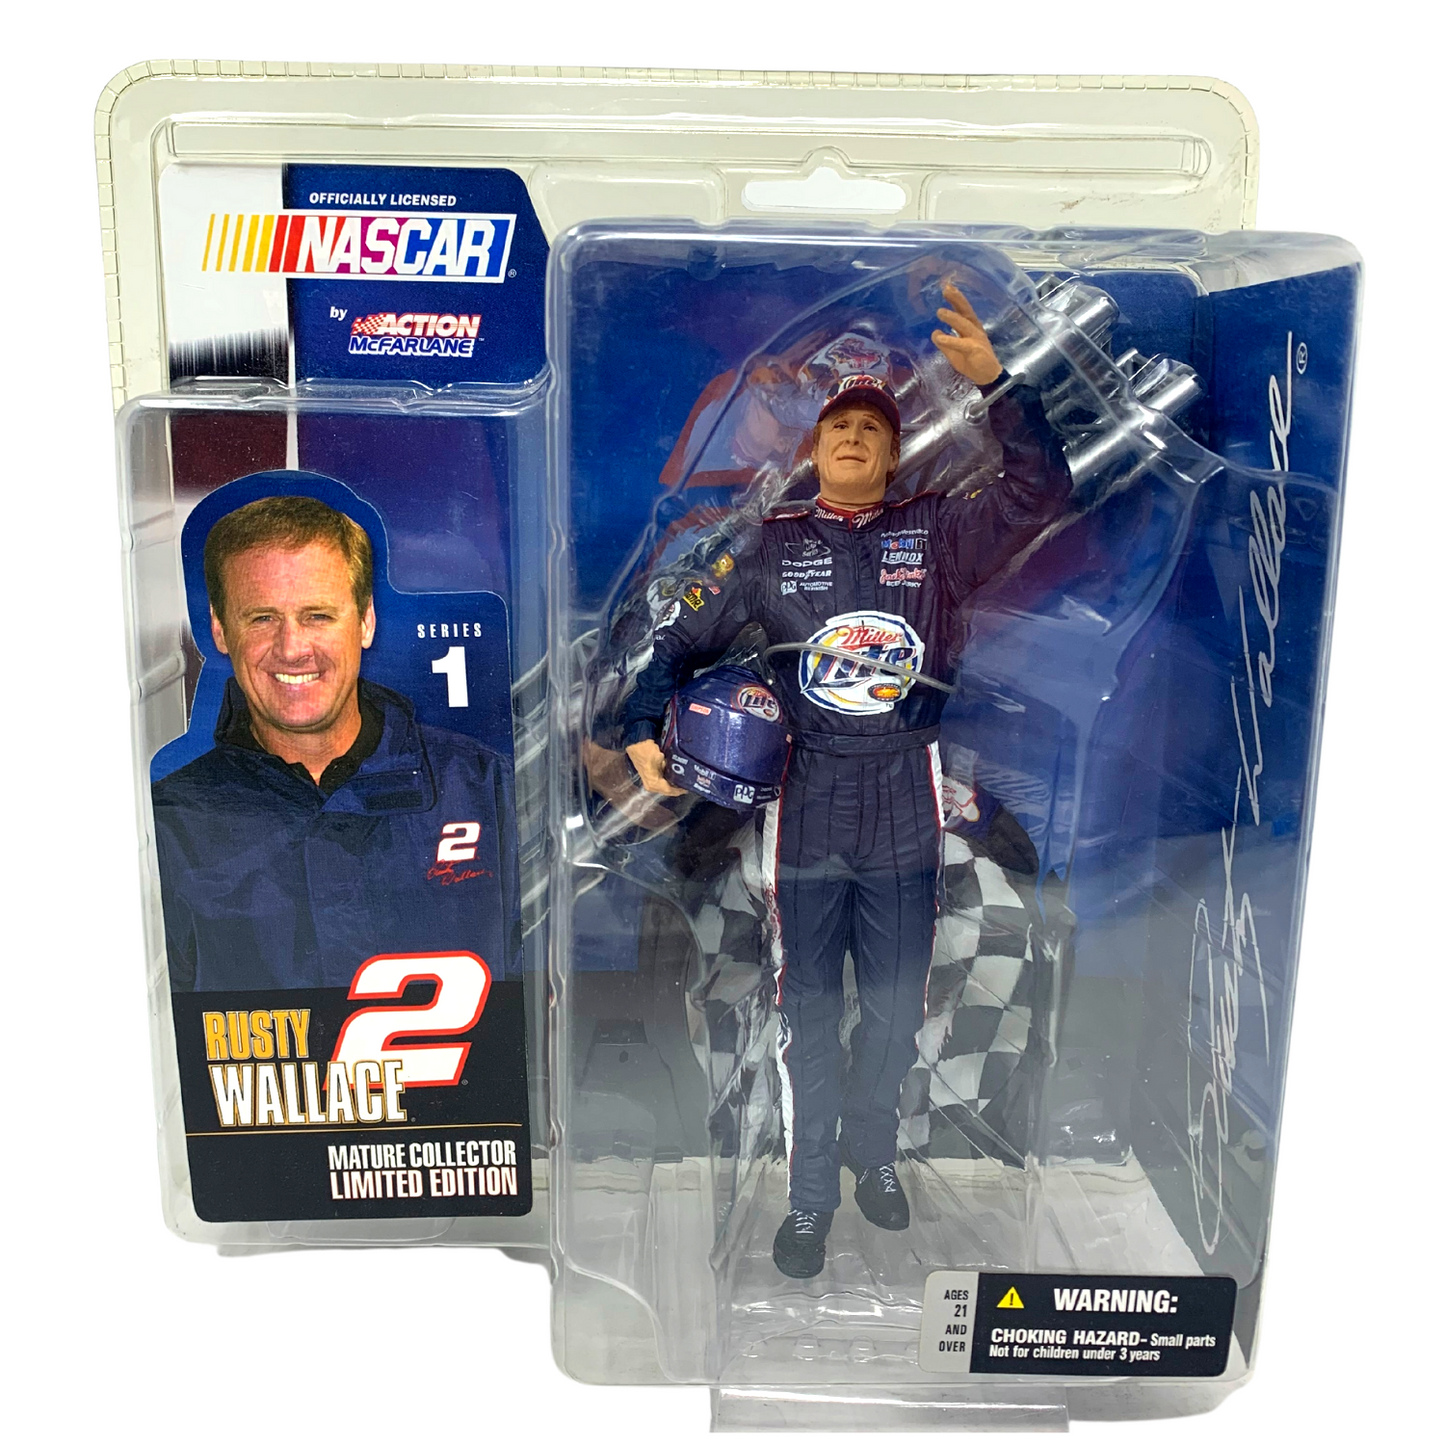 McFarlane Action Nascar Rusty Wallace # 2 Series 1 Limited Edition Figurine